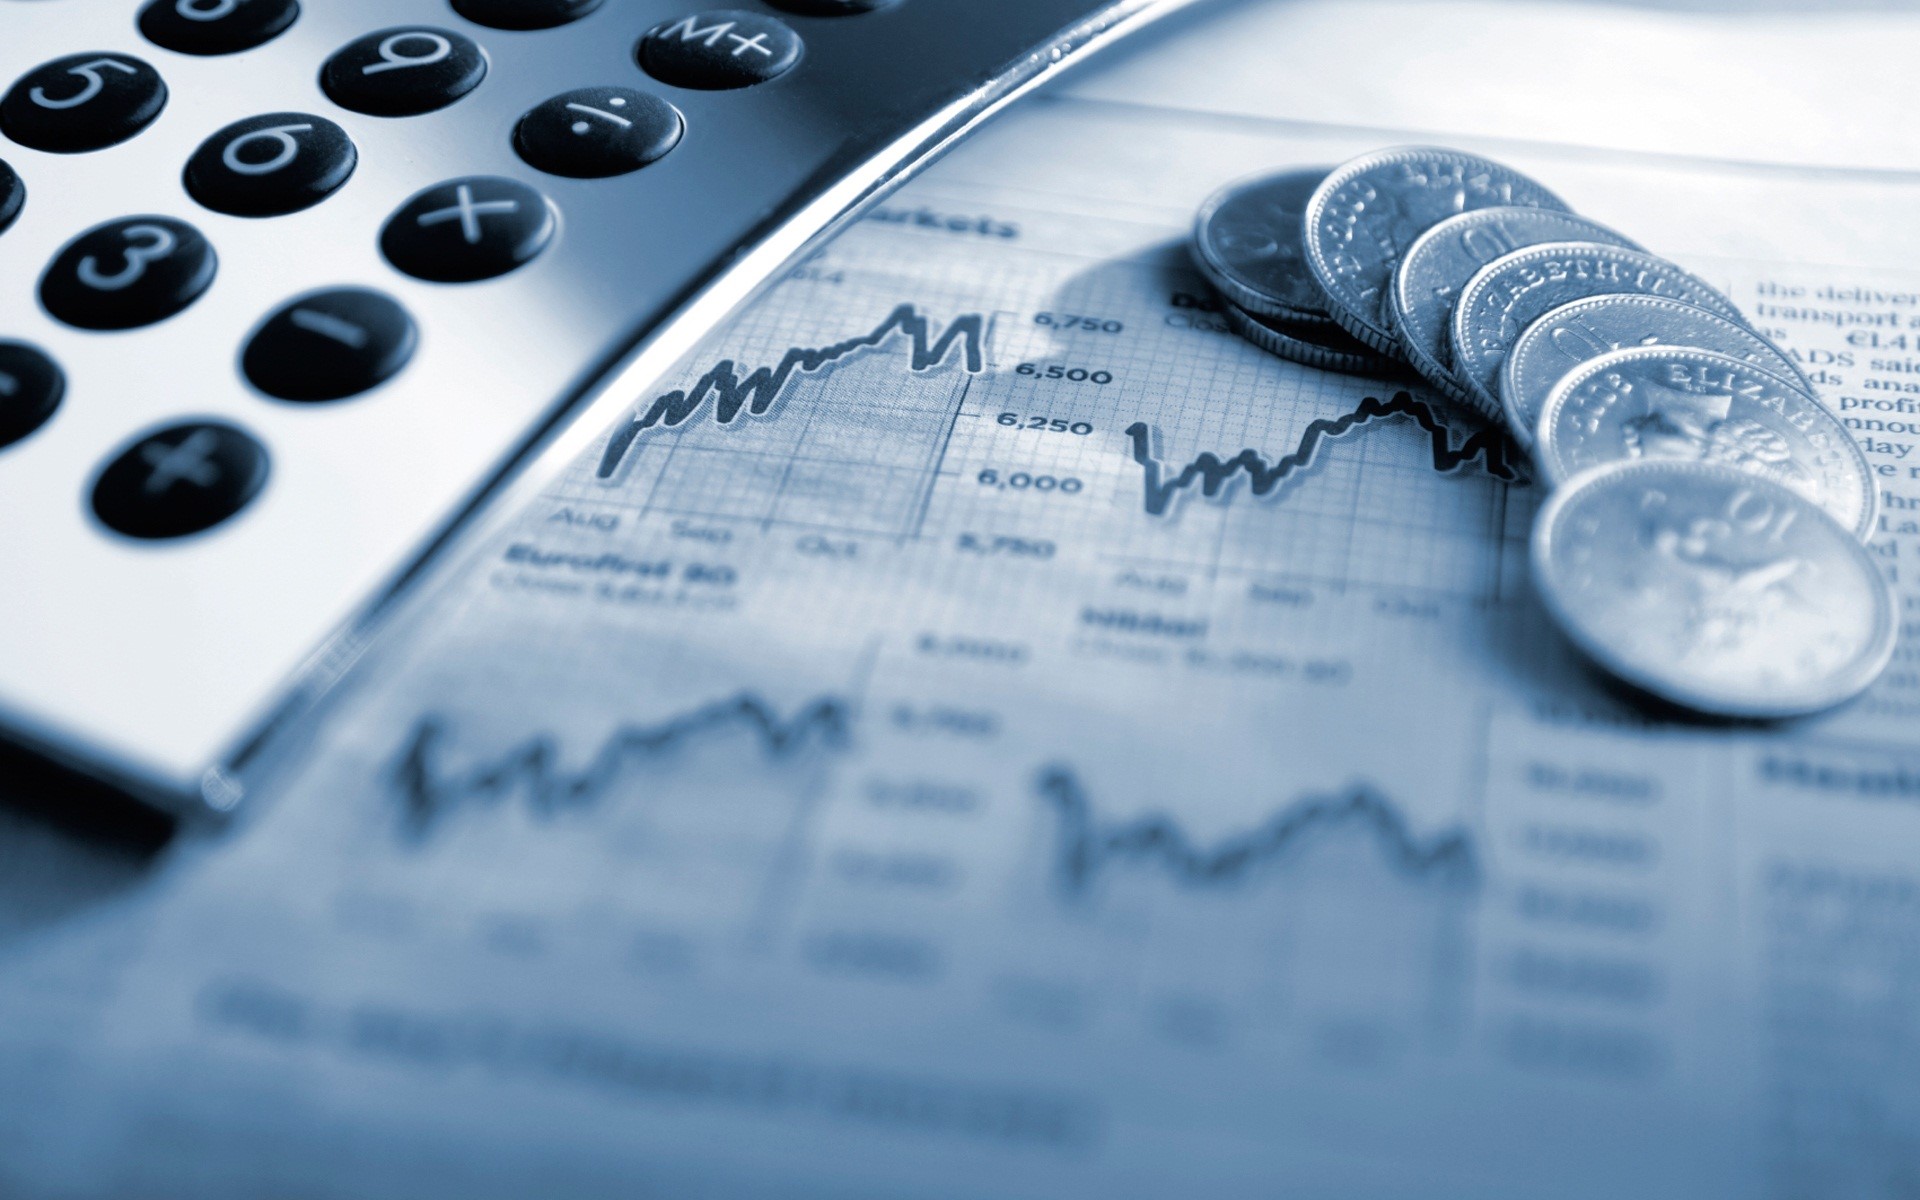 stock image of a calculator, coins, and financial reports